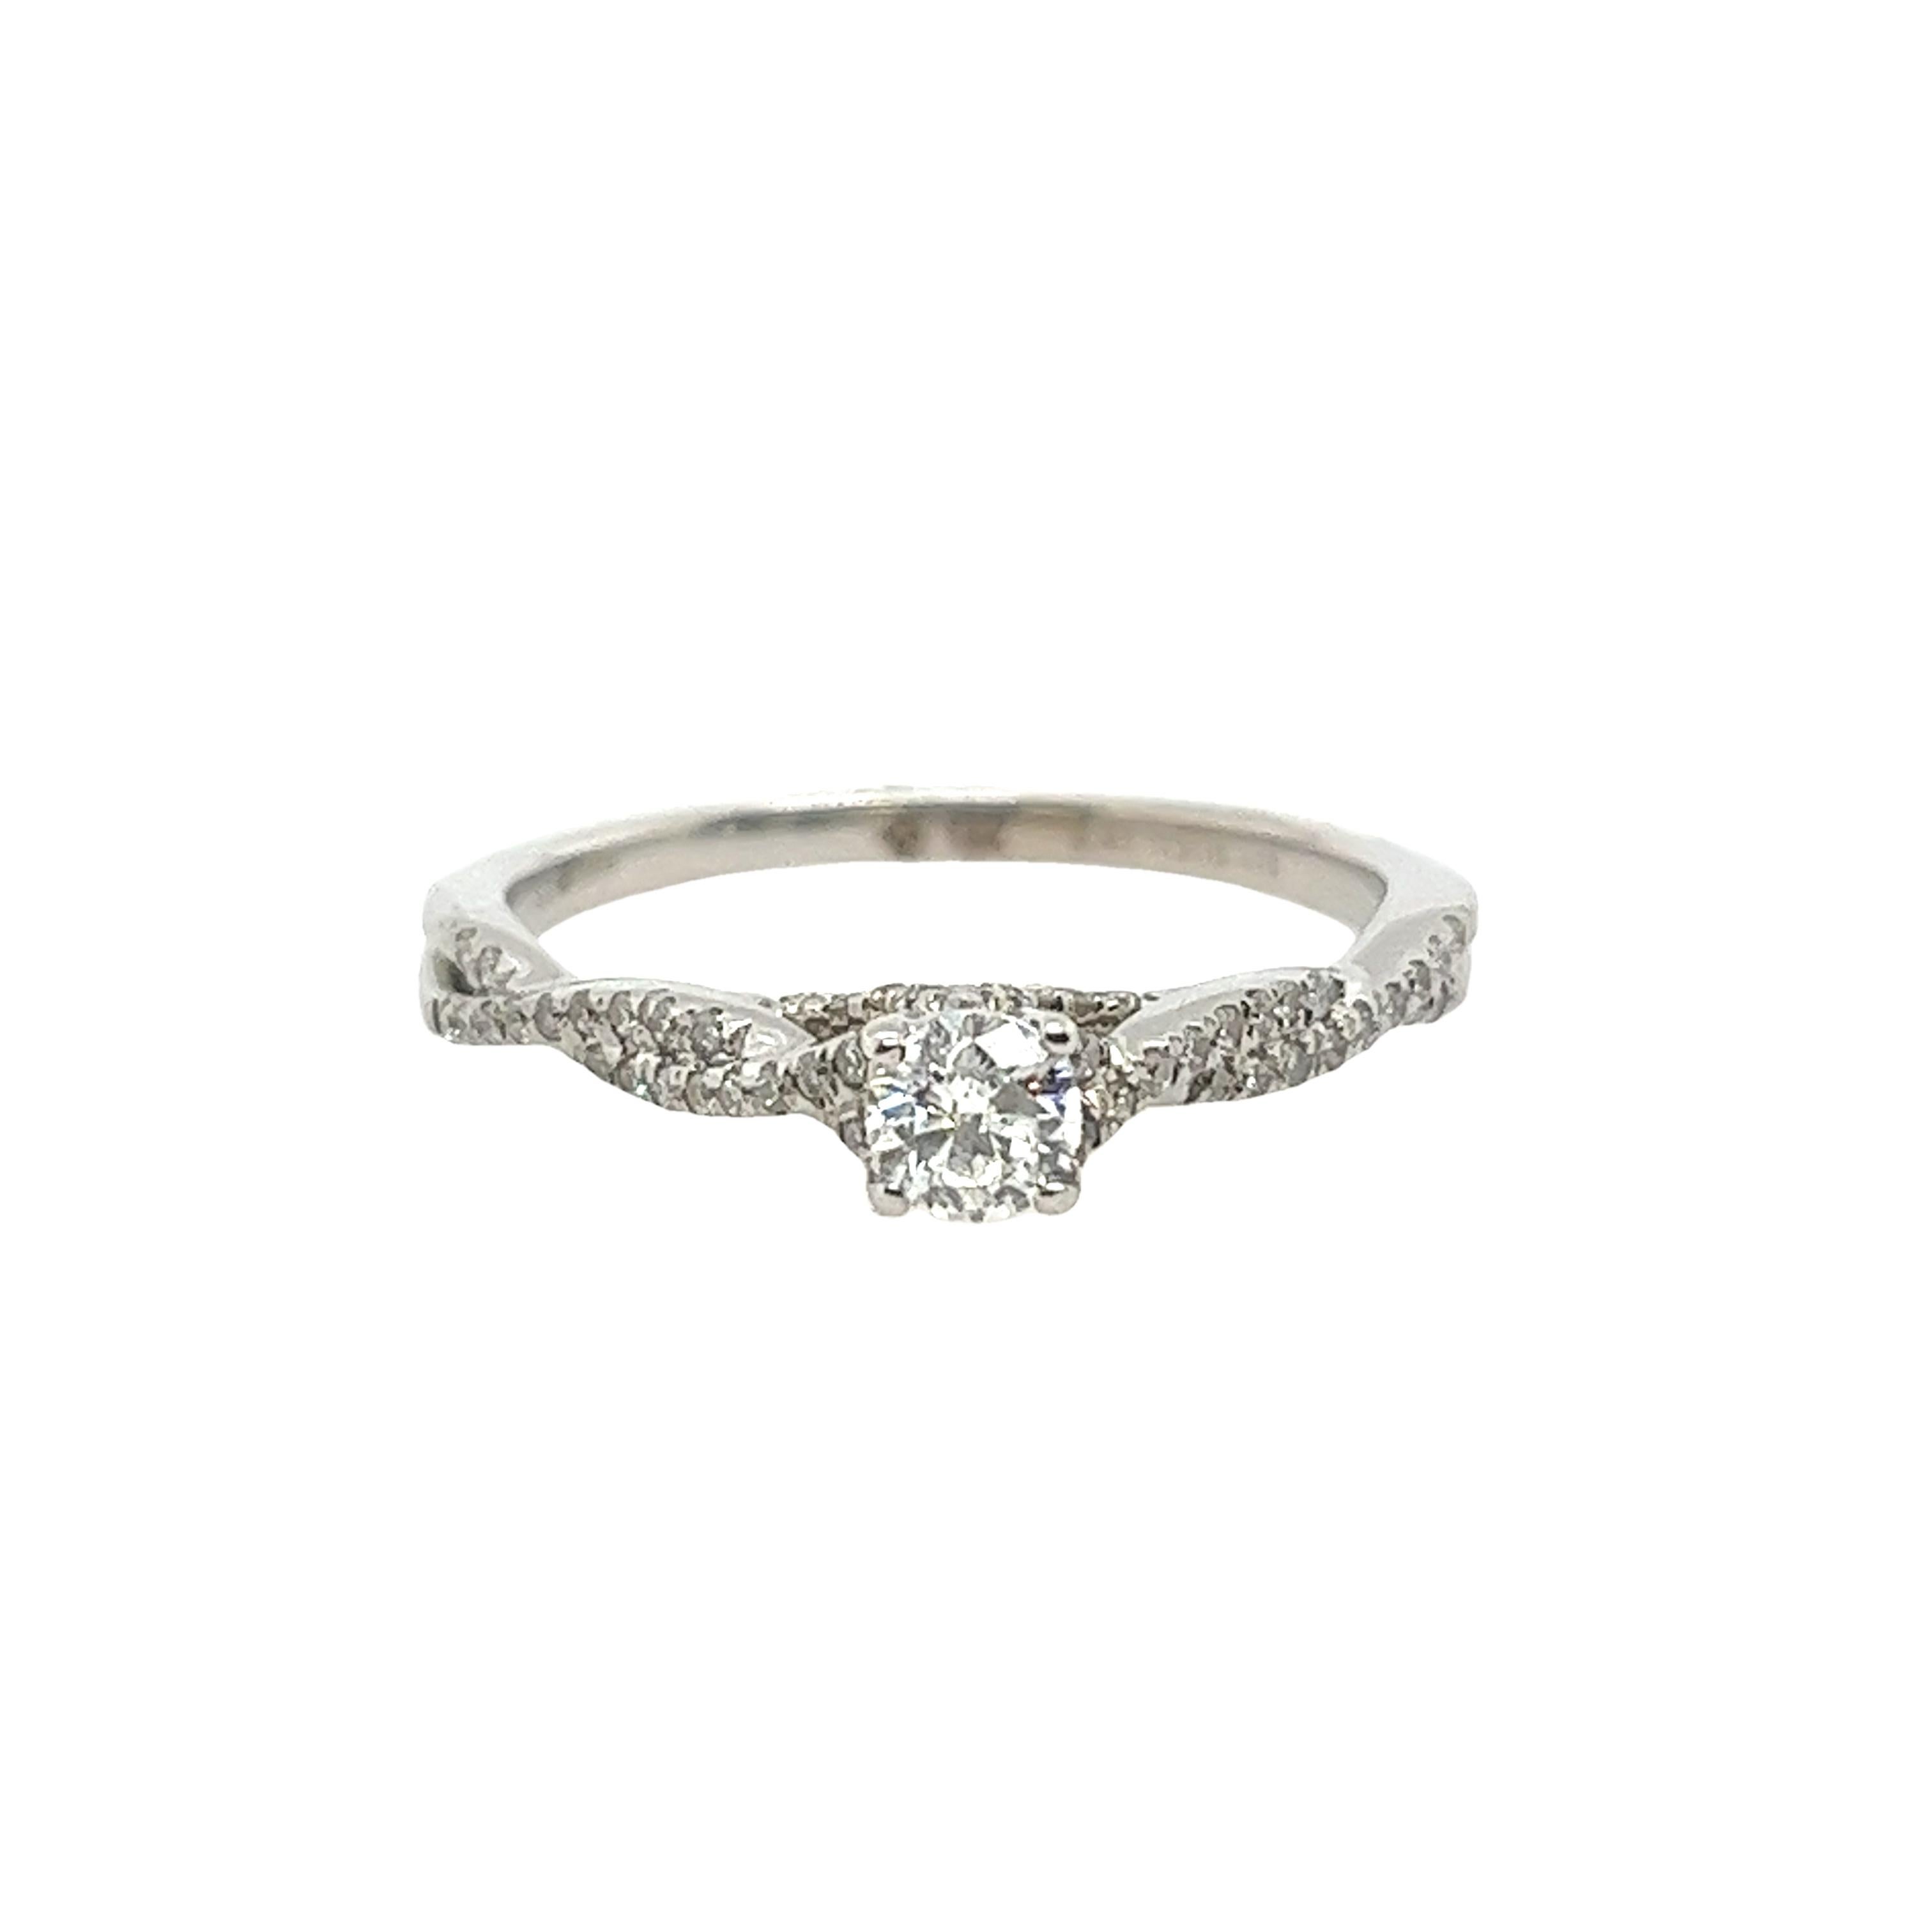 This preloved classic solitaire round brilliant-cut diamond ring is a round brilliant cut 0.23ct G/I1 and diamonds on shoulders 0.18ct H-I/I1 set with a total of 0.41ct diamonds. A timeless symbol of everlasting love.

Total Diamond Weight: